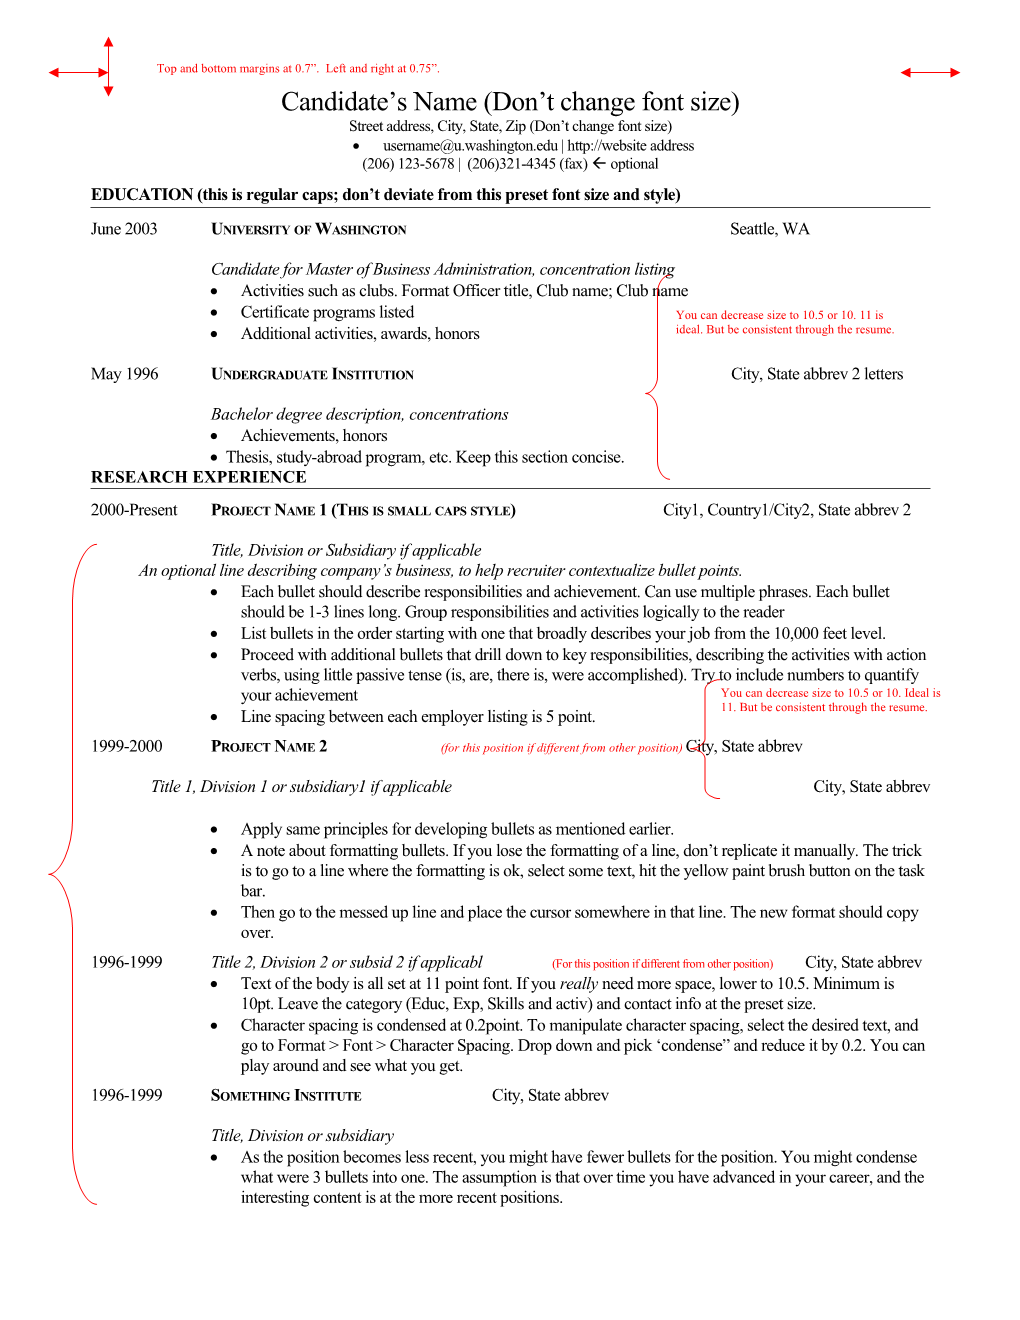 Resume Template Guide s1